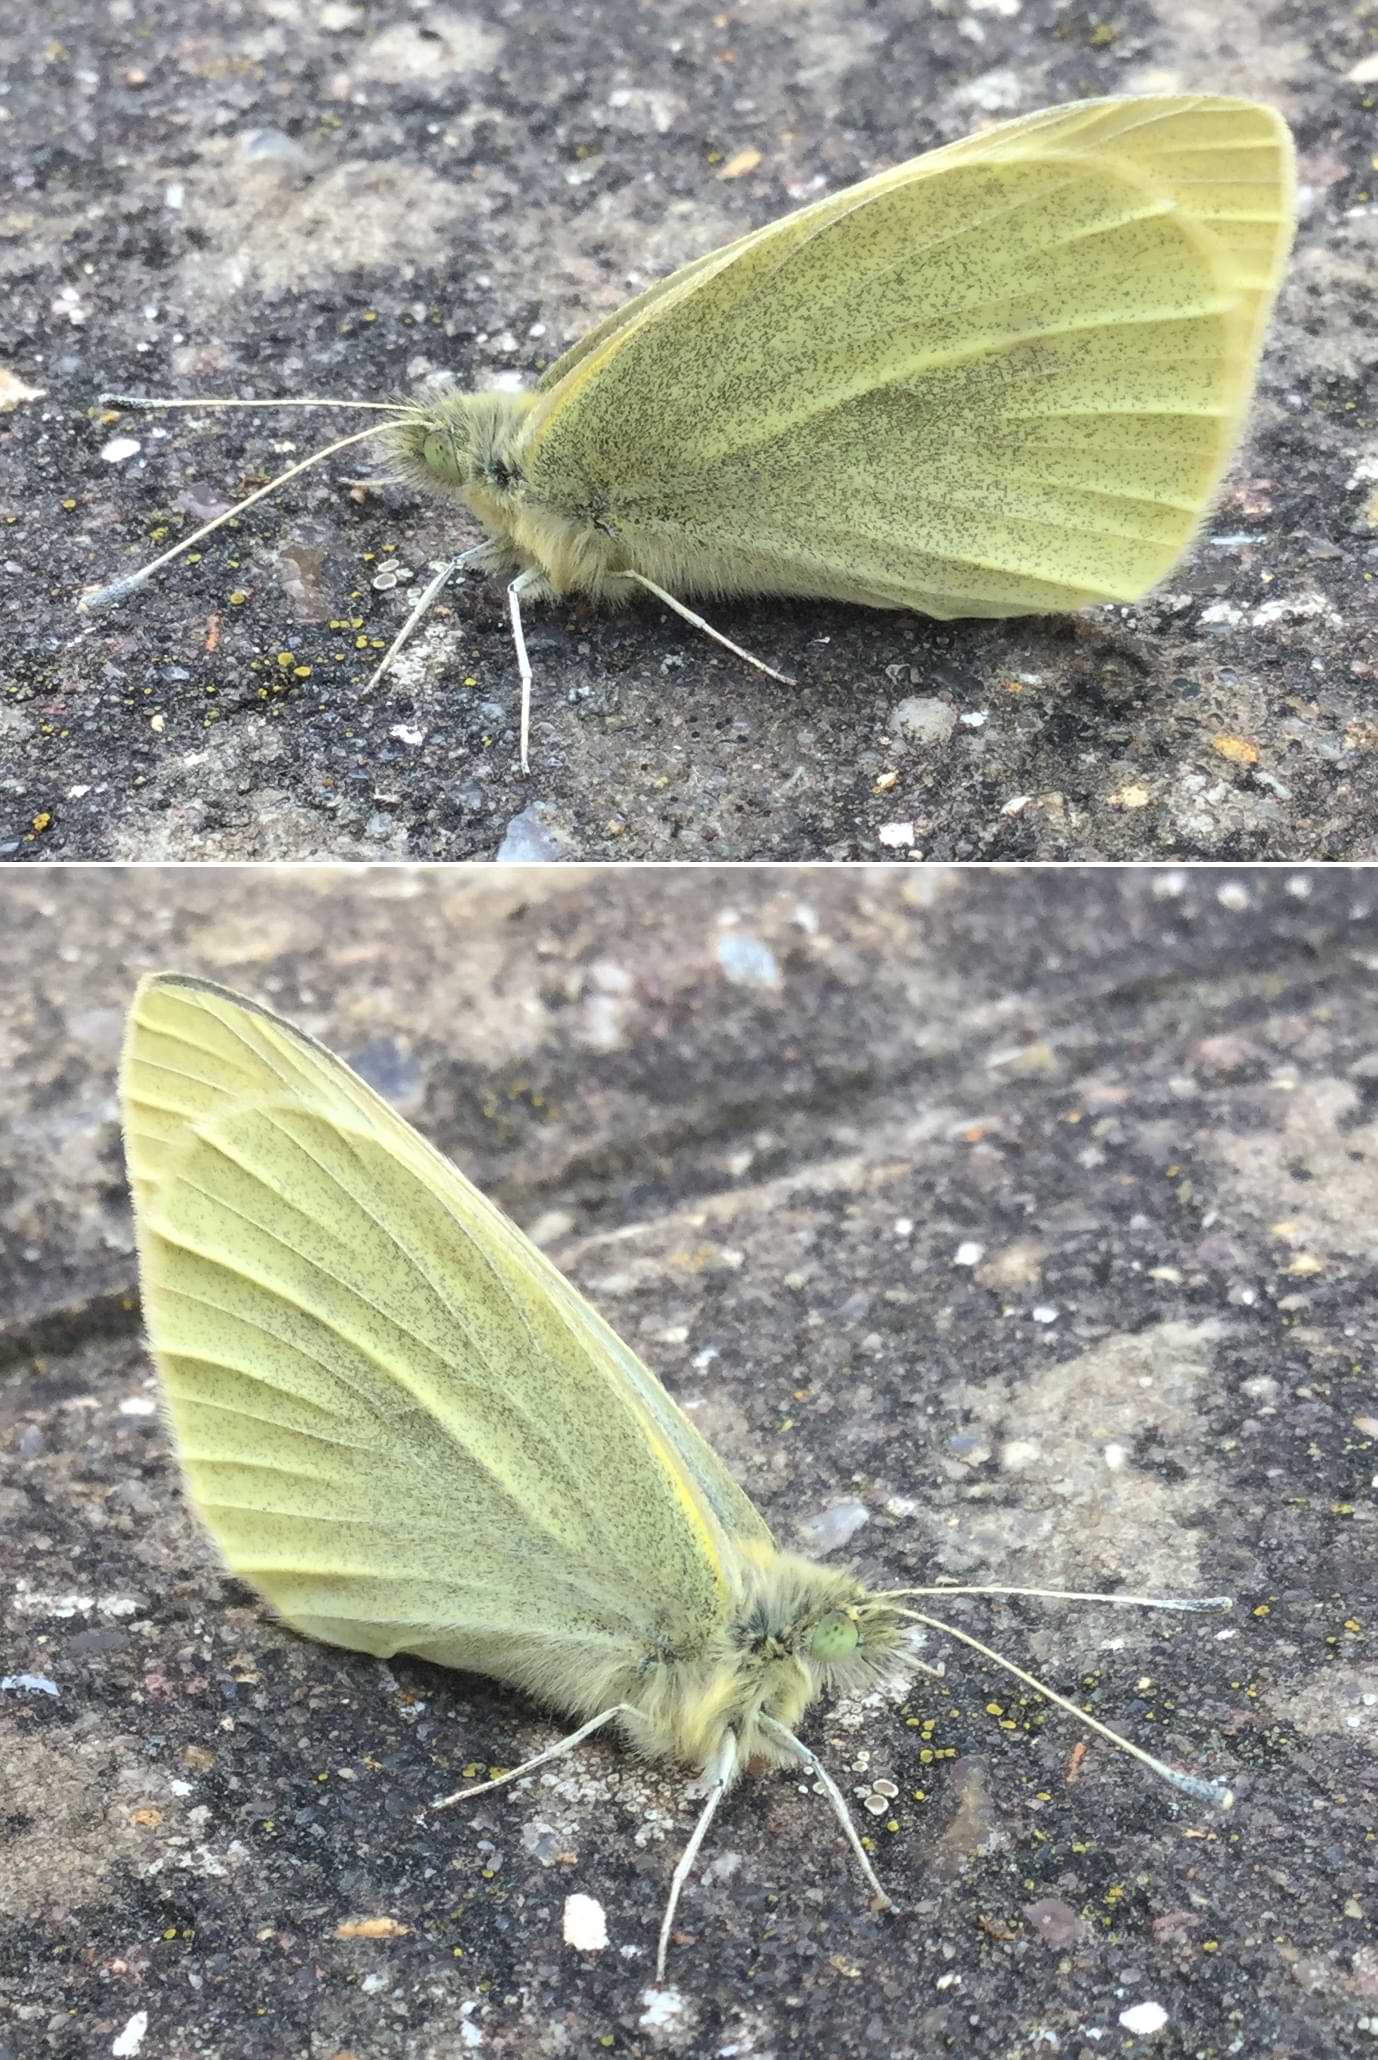 Two photos of a small fluffy moth resting on stone pavement. Its wings have ridges running down them and are patterned with lots of tiny pixel-like dots.